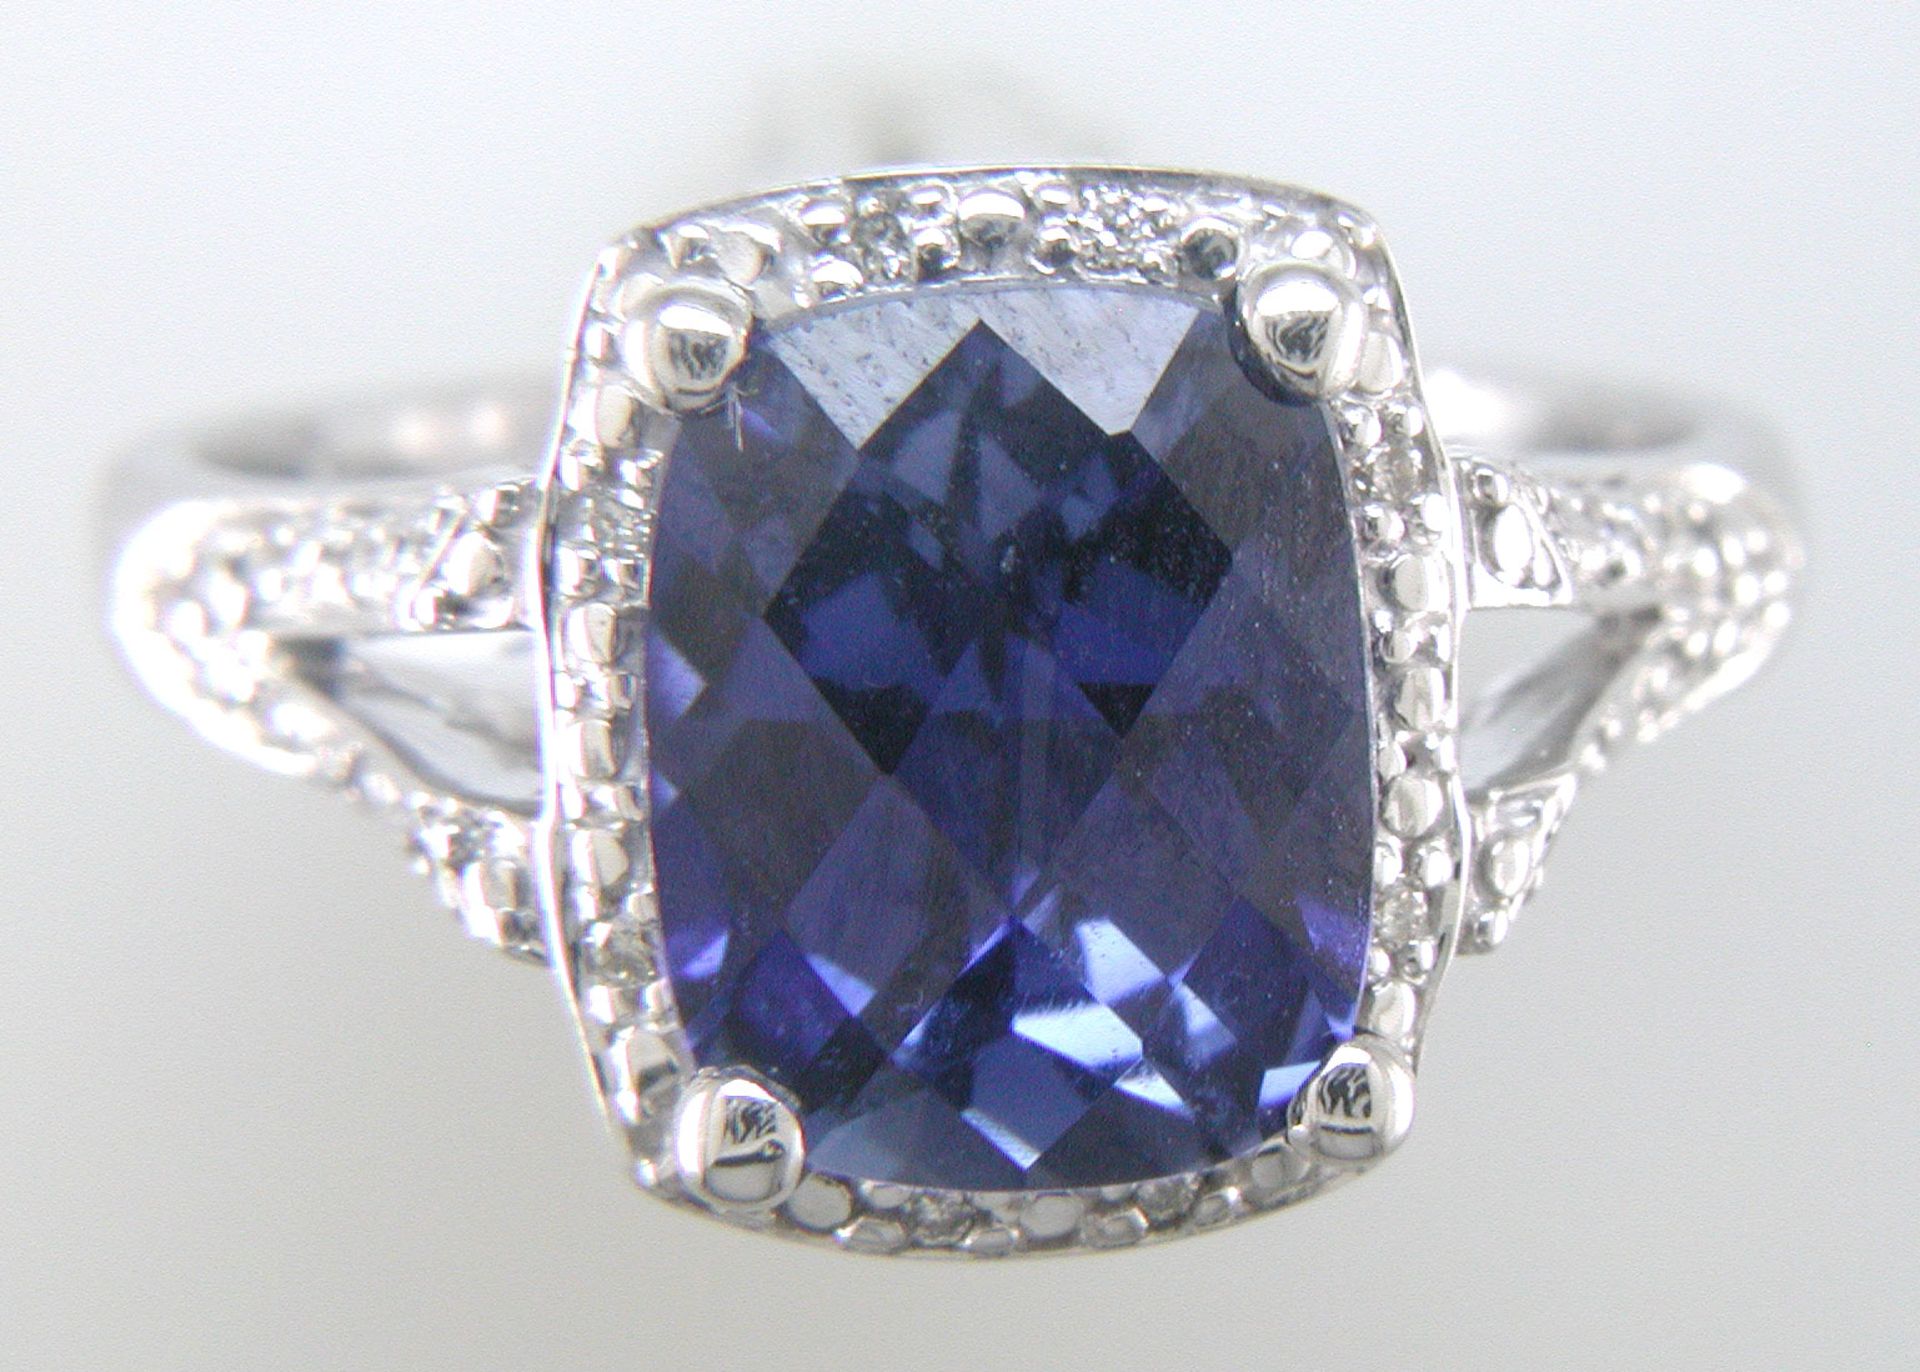 9ct White Gold Cushion Cluster Diamond And Created Ceylon Sapphire Ring - Valued By IDI £3,395. - Image 9 of 10